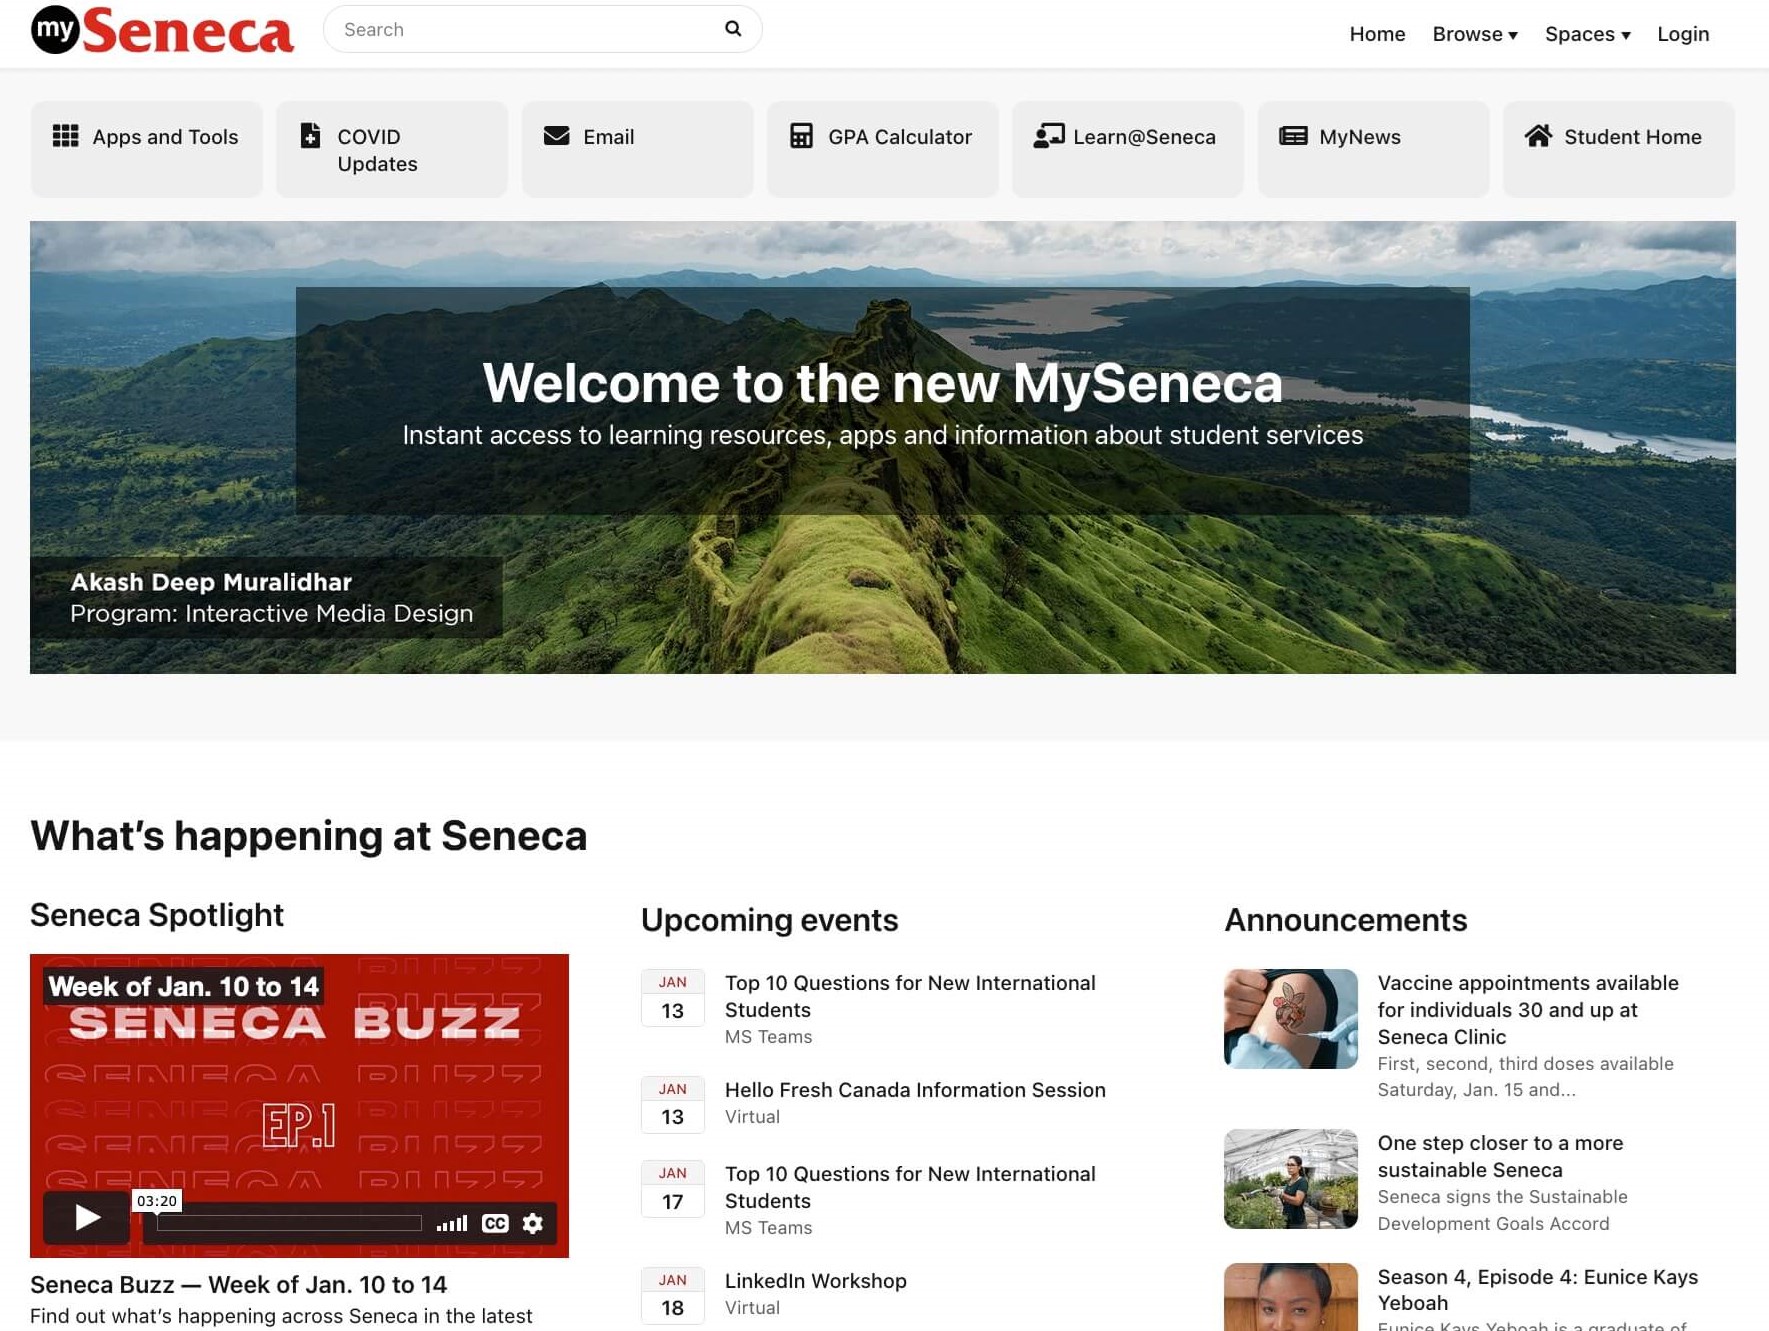 New MySeneca launches for students